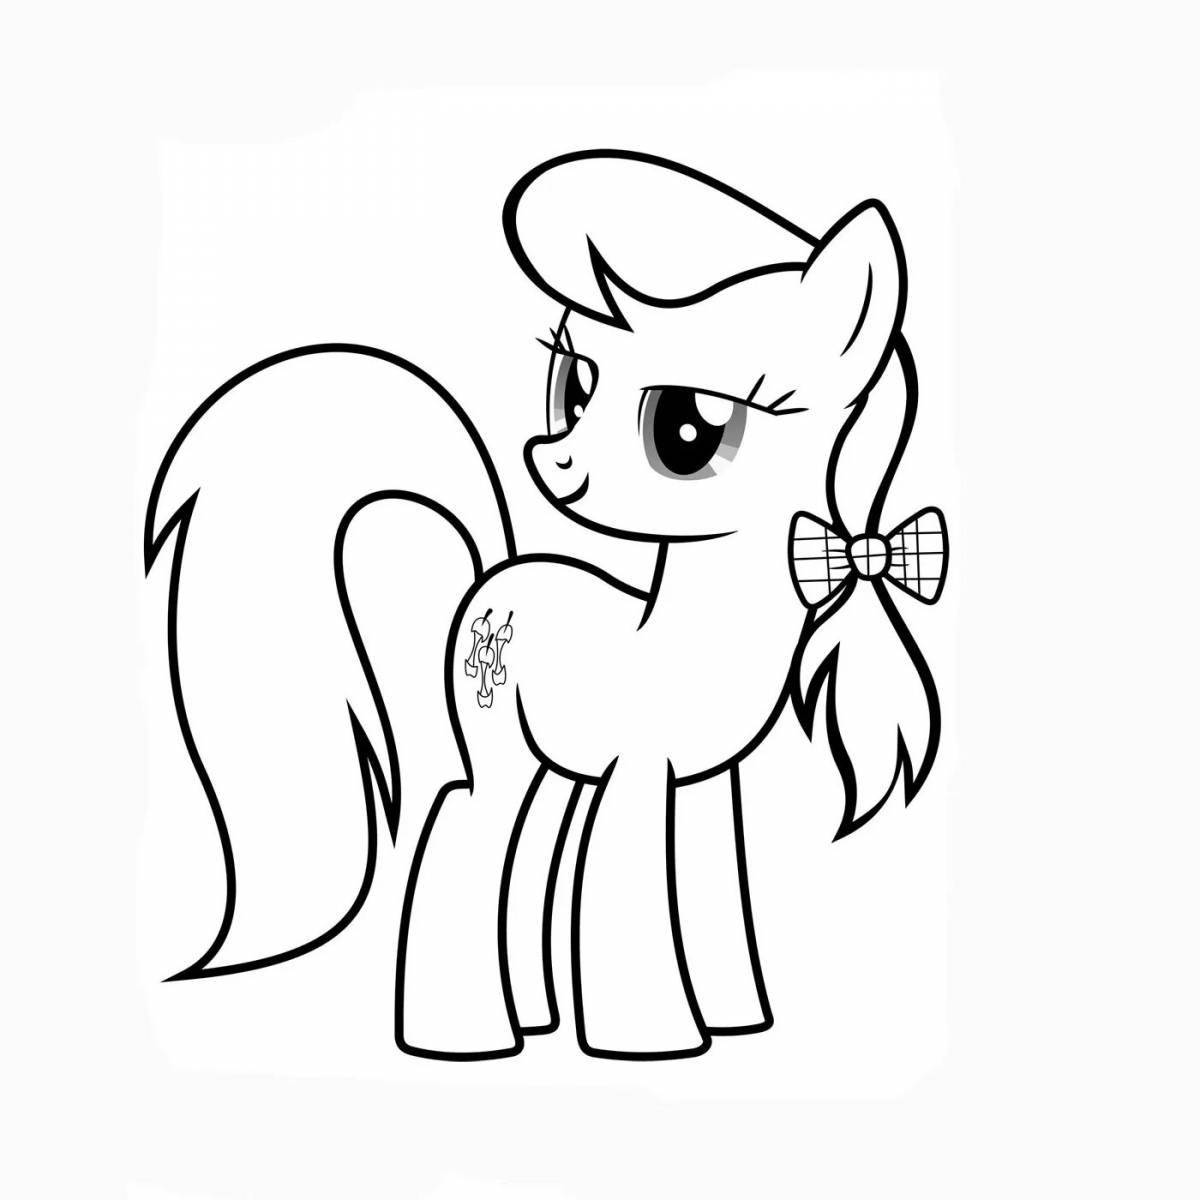 Coloring page gorgeous pony drawing